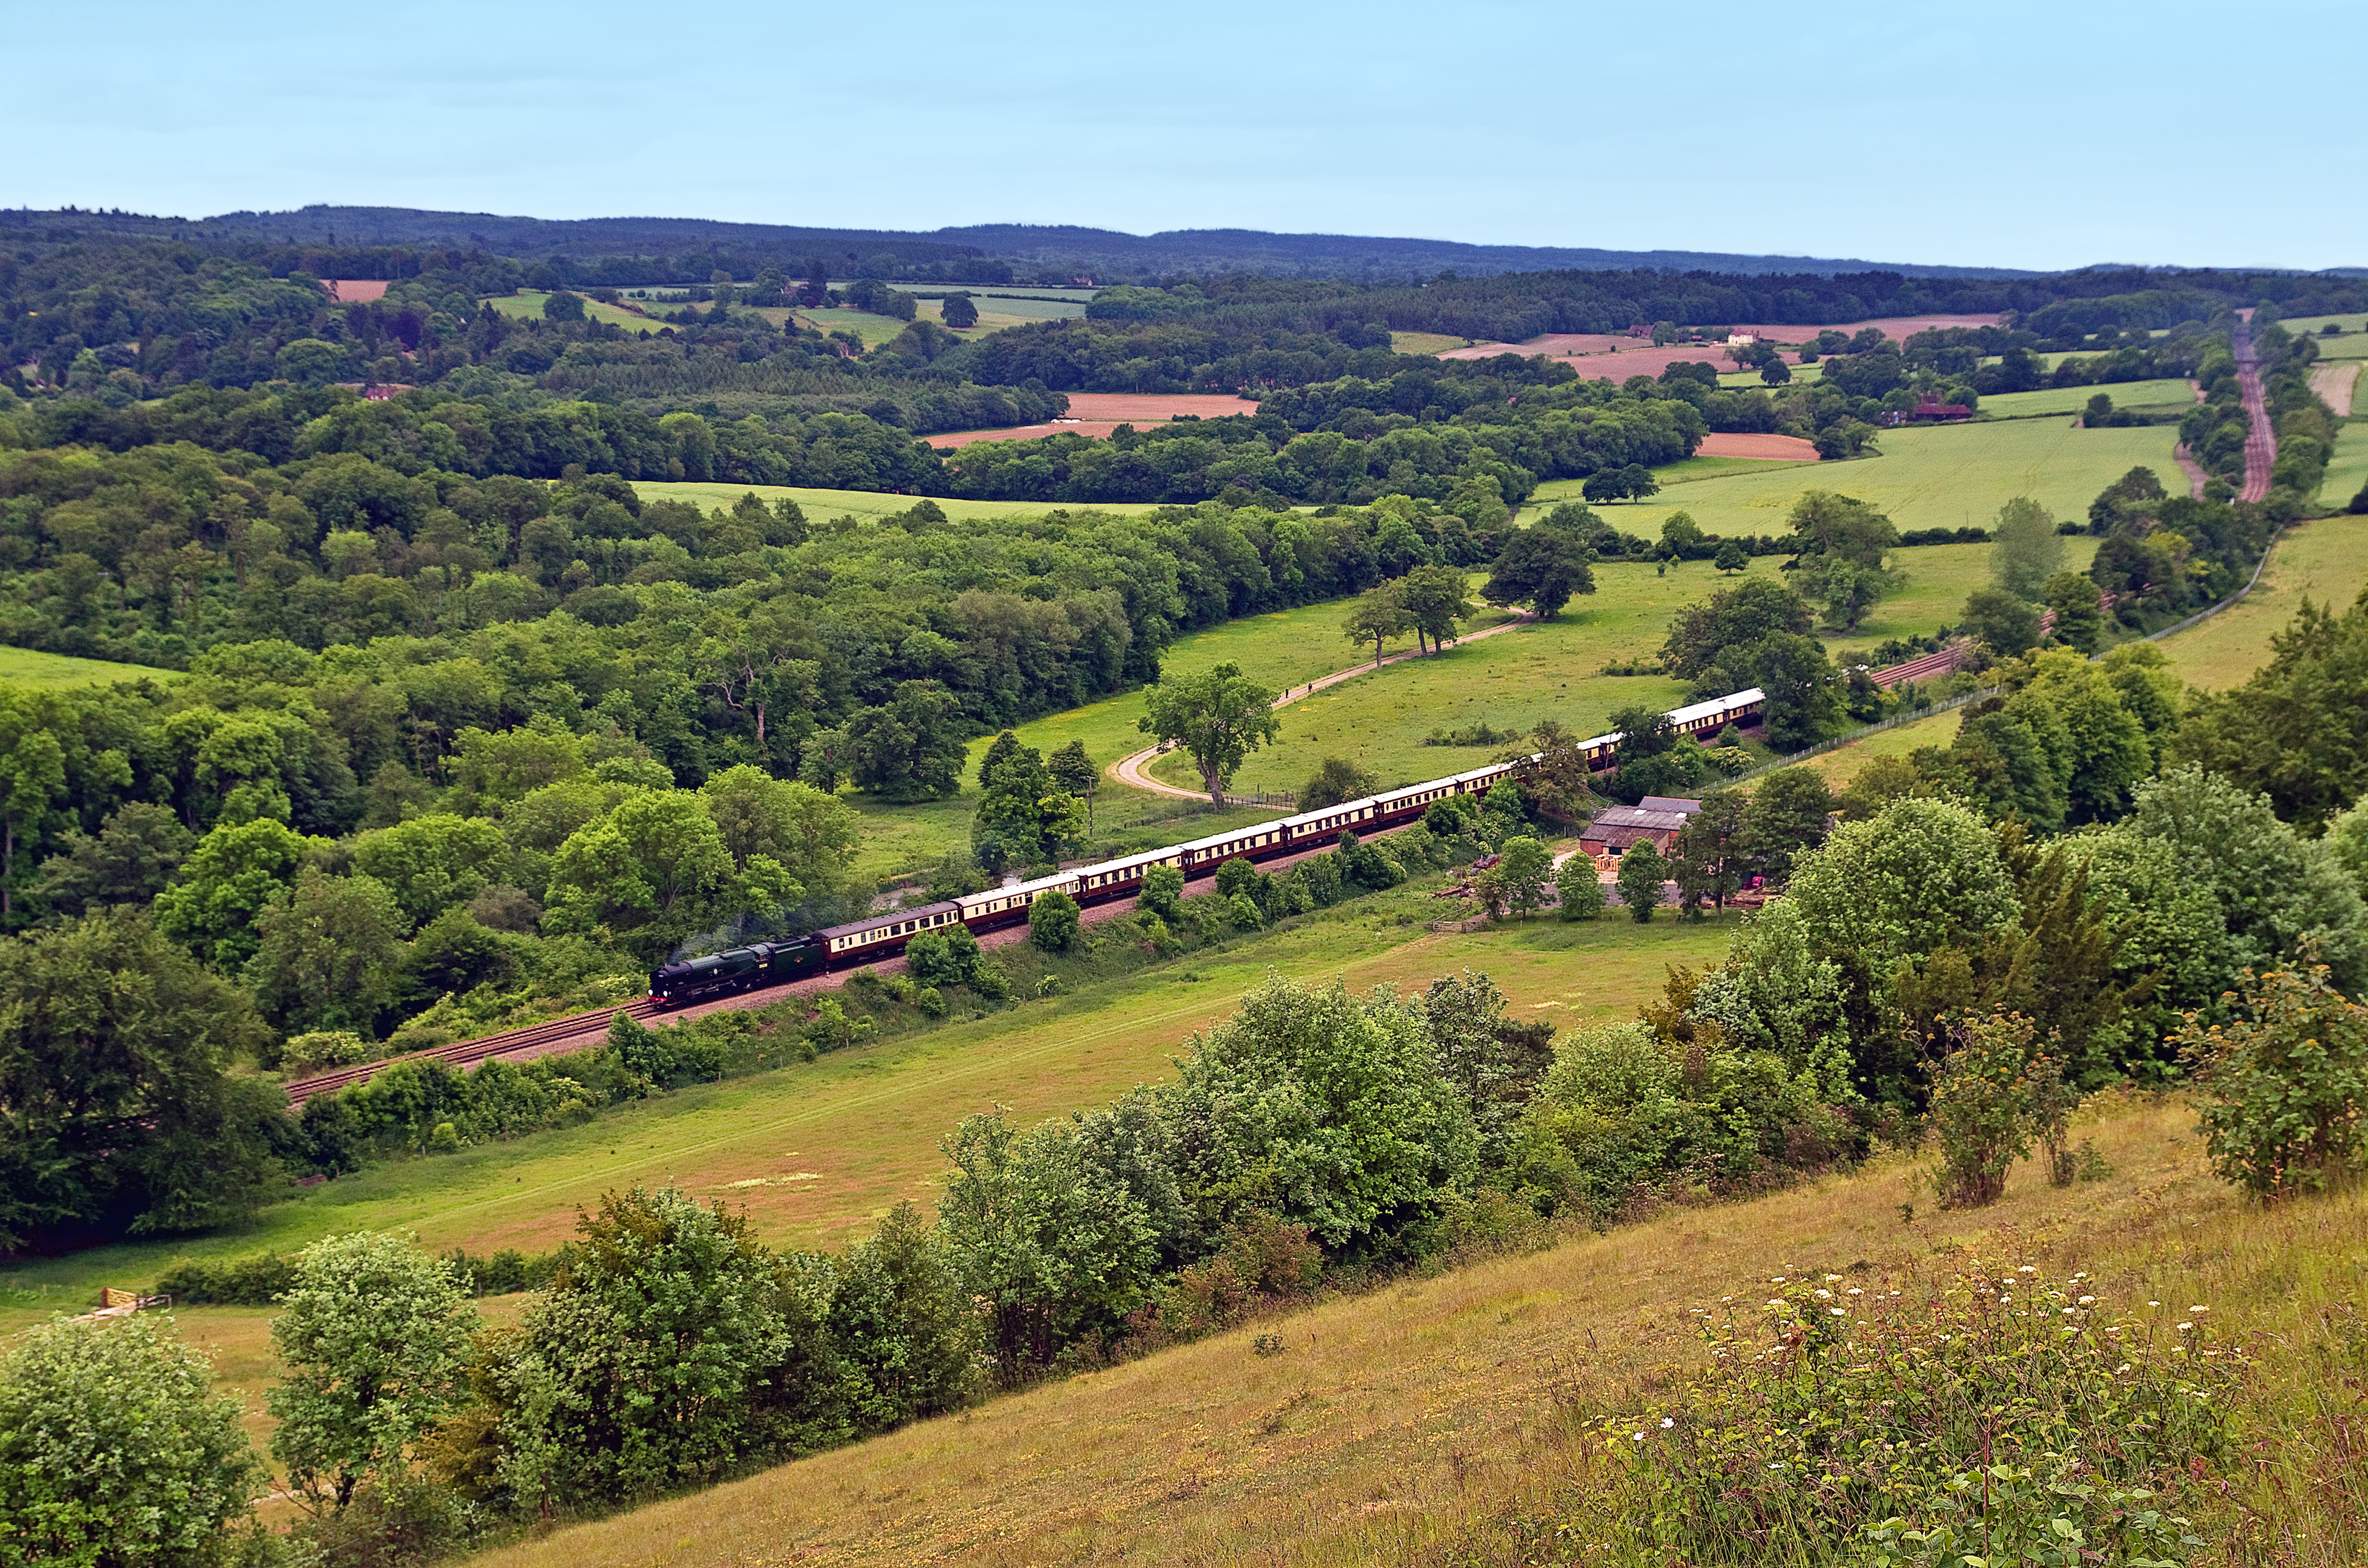 Belmond on X: Step into the design vision of Wes Anderson on the British  Pullman train and share an unforgettable feast on the rails.  #TasteOfBelmond #BelmondTrains #England    / X